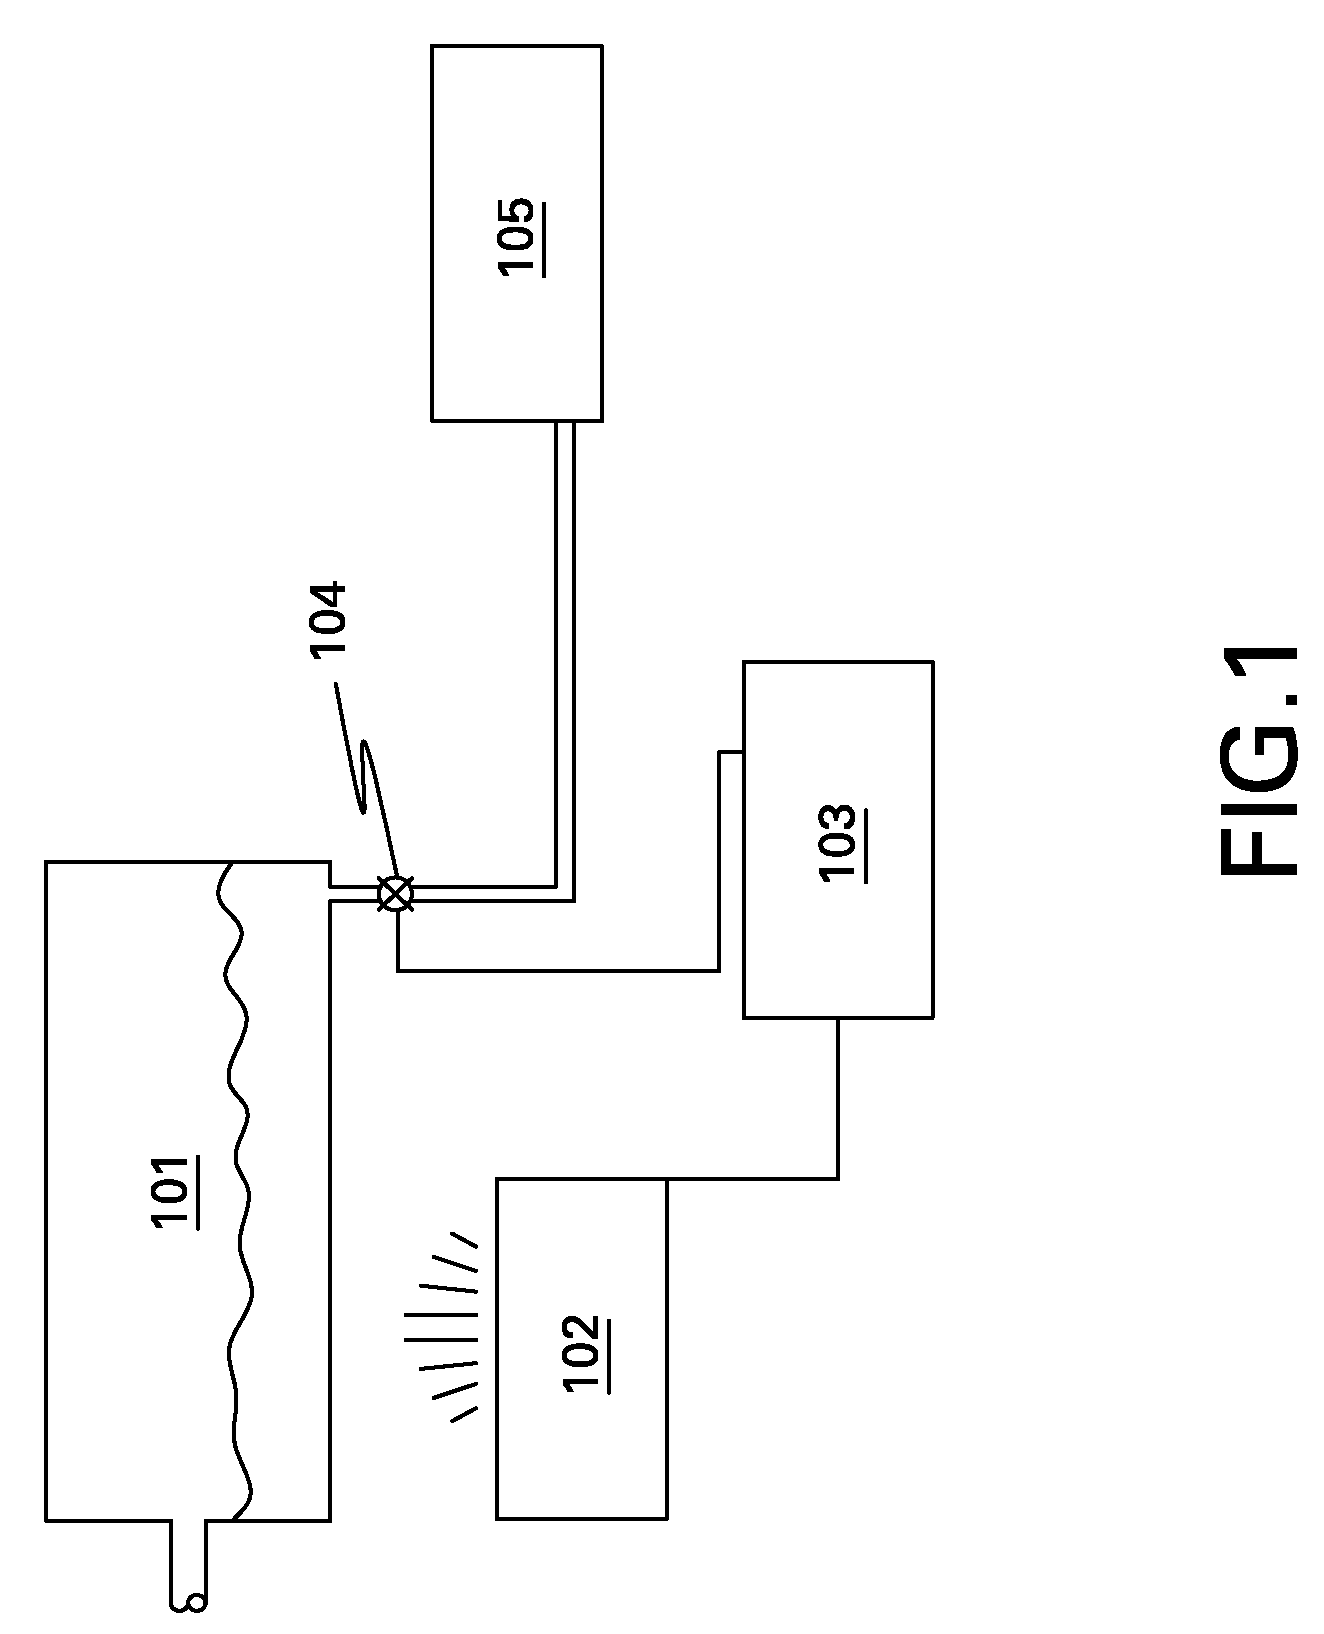 Apparatus and method for fully automated closed system quality control of a substance